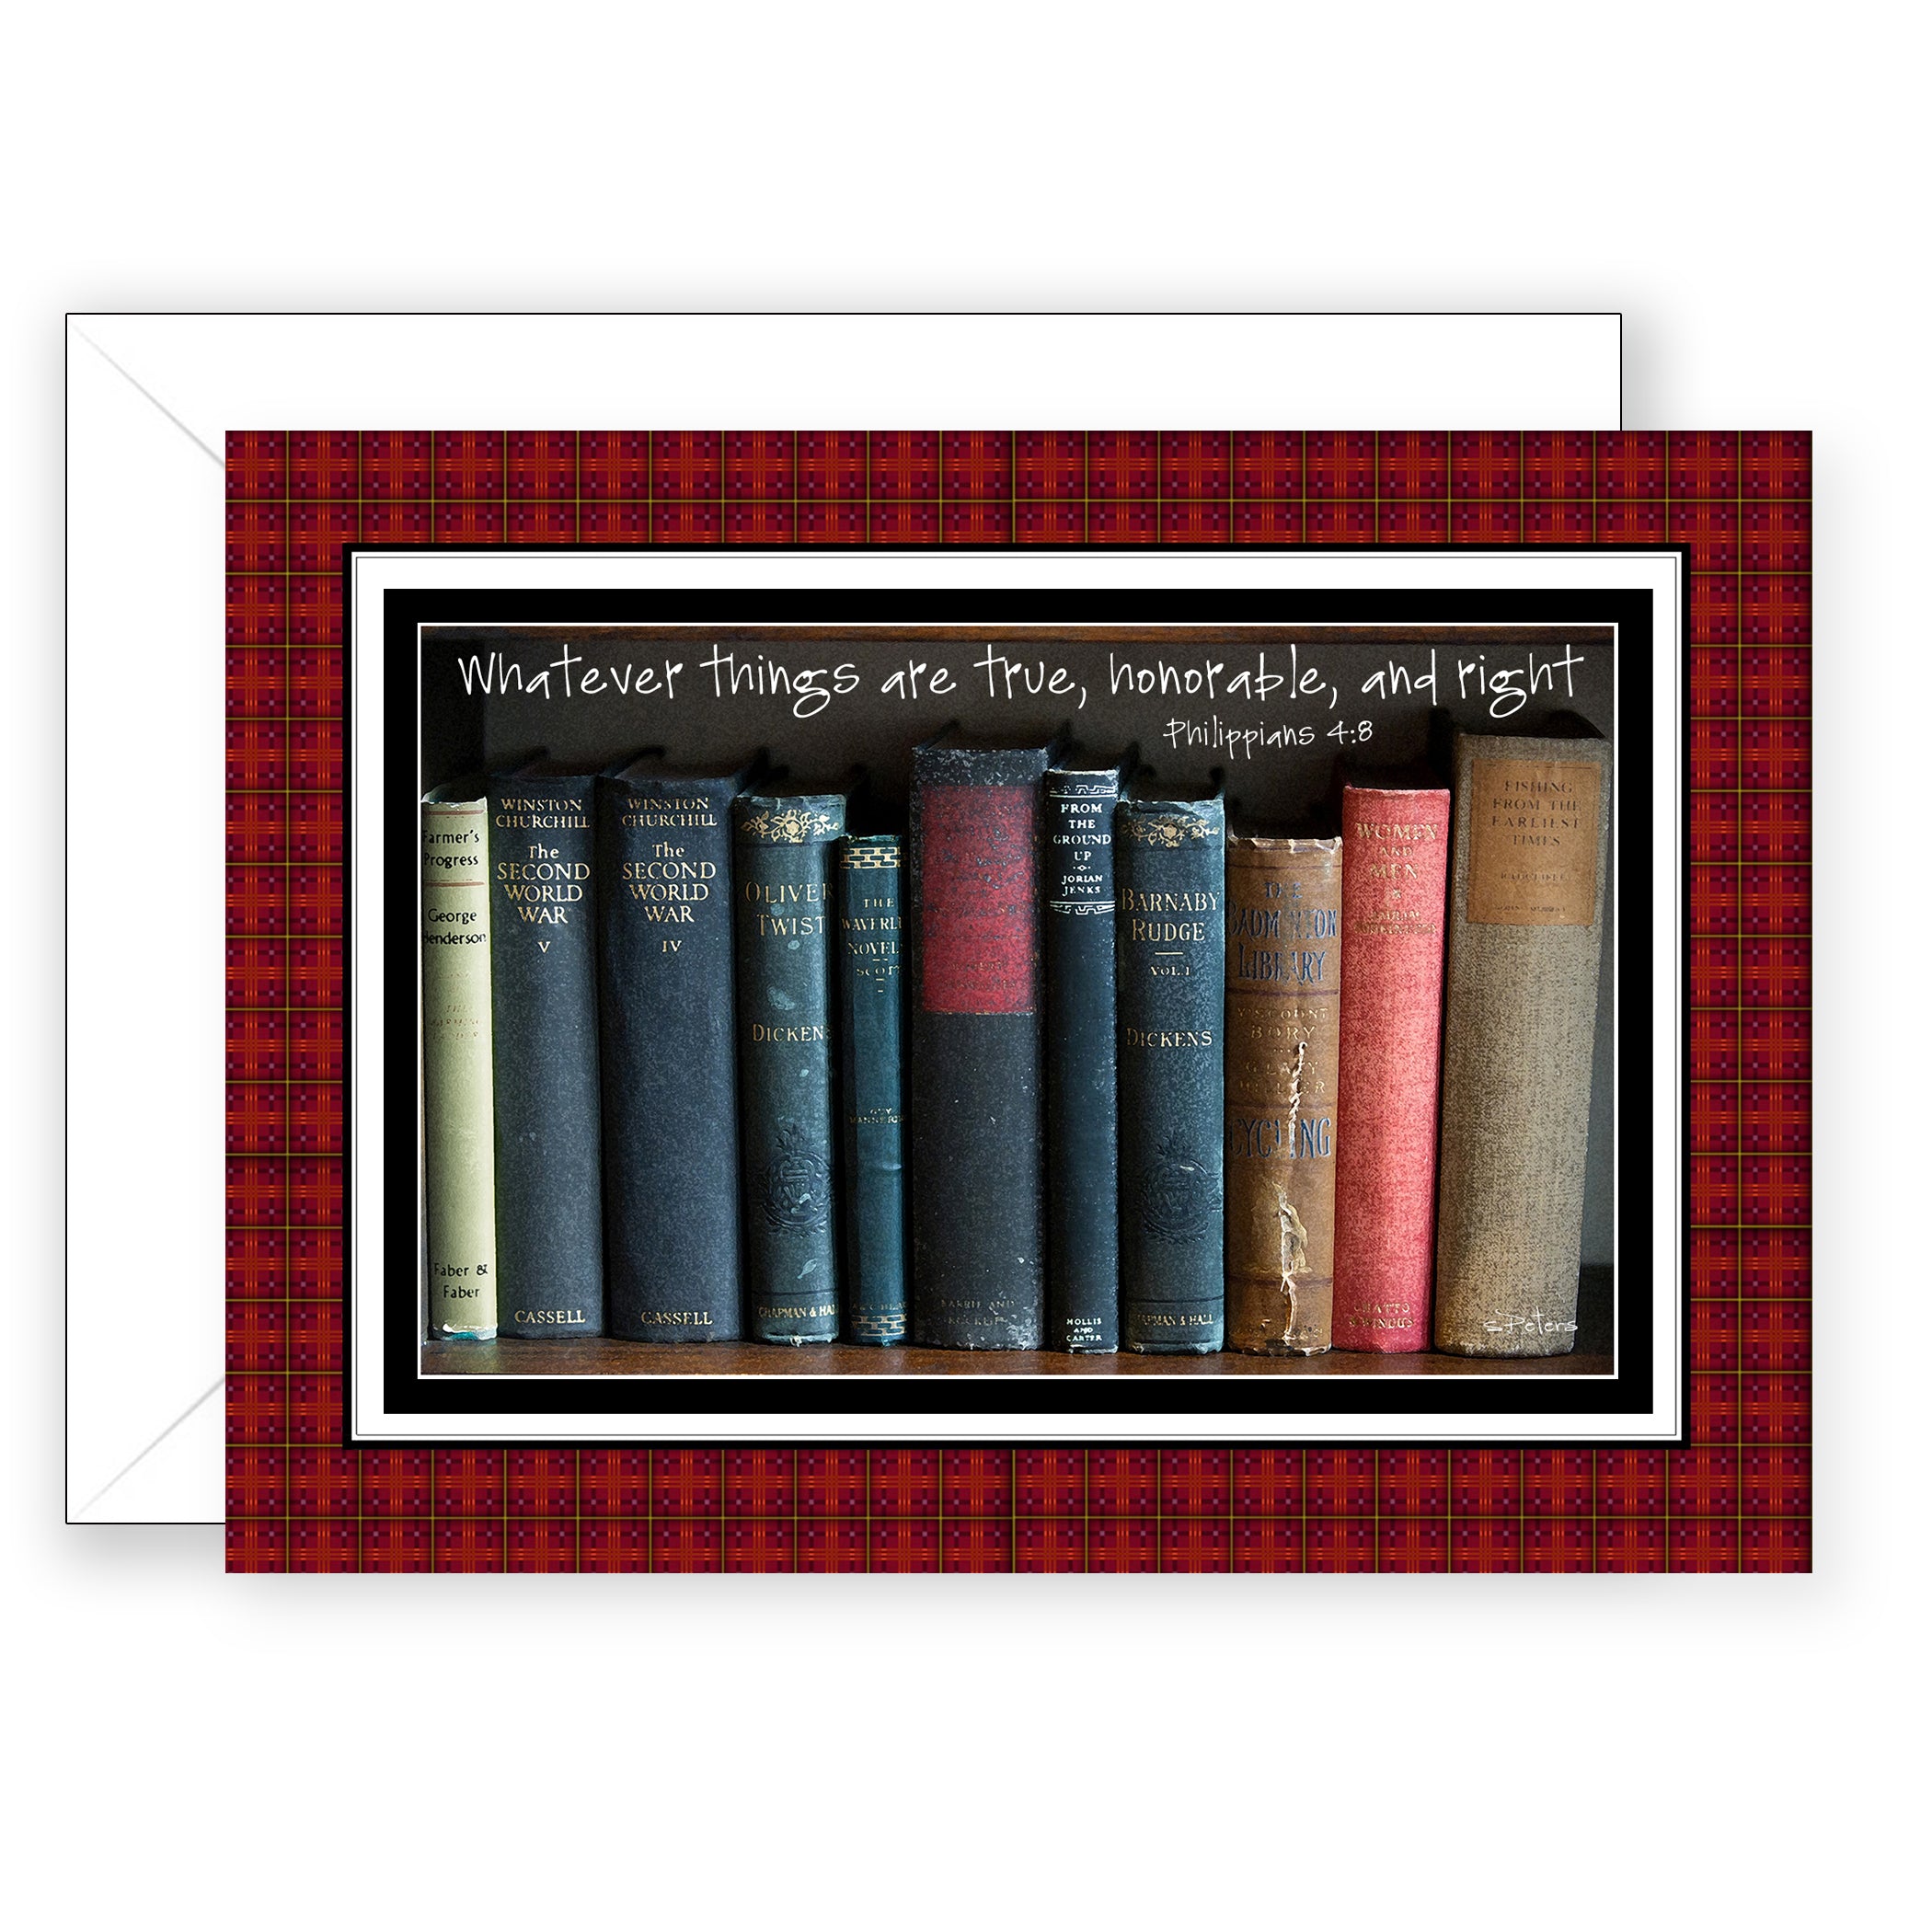 Love of Books (Philippians 4:8) - Father's Day Card